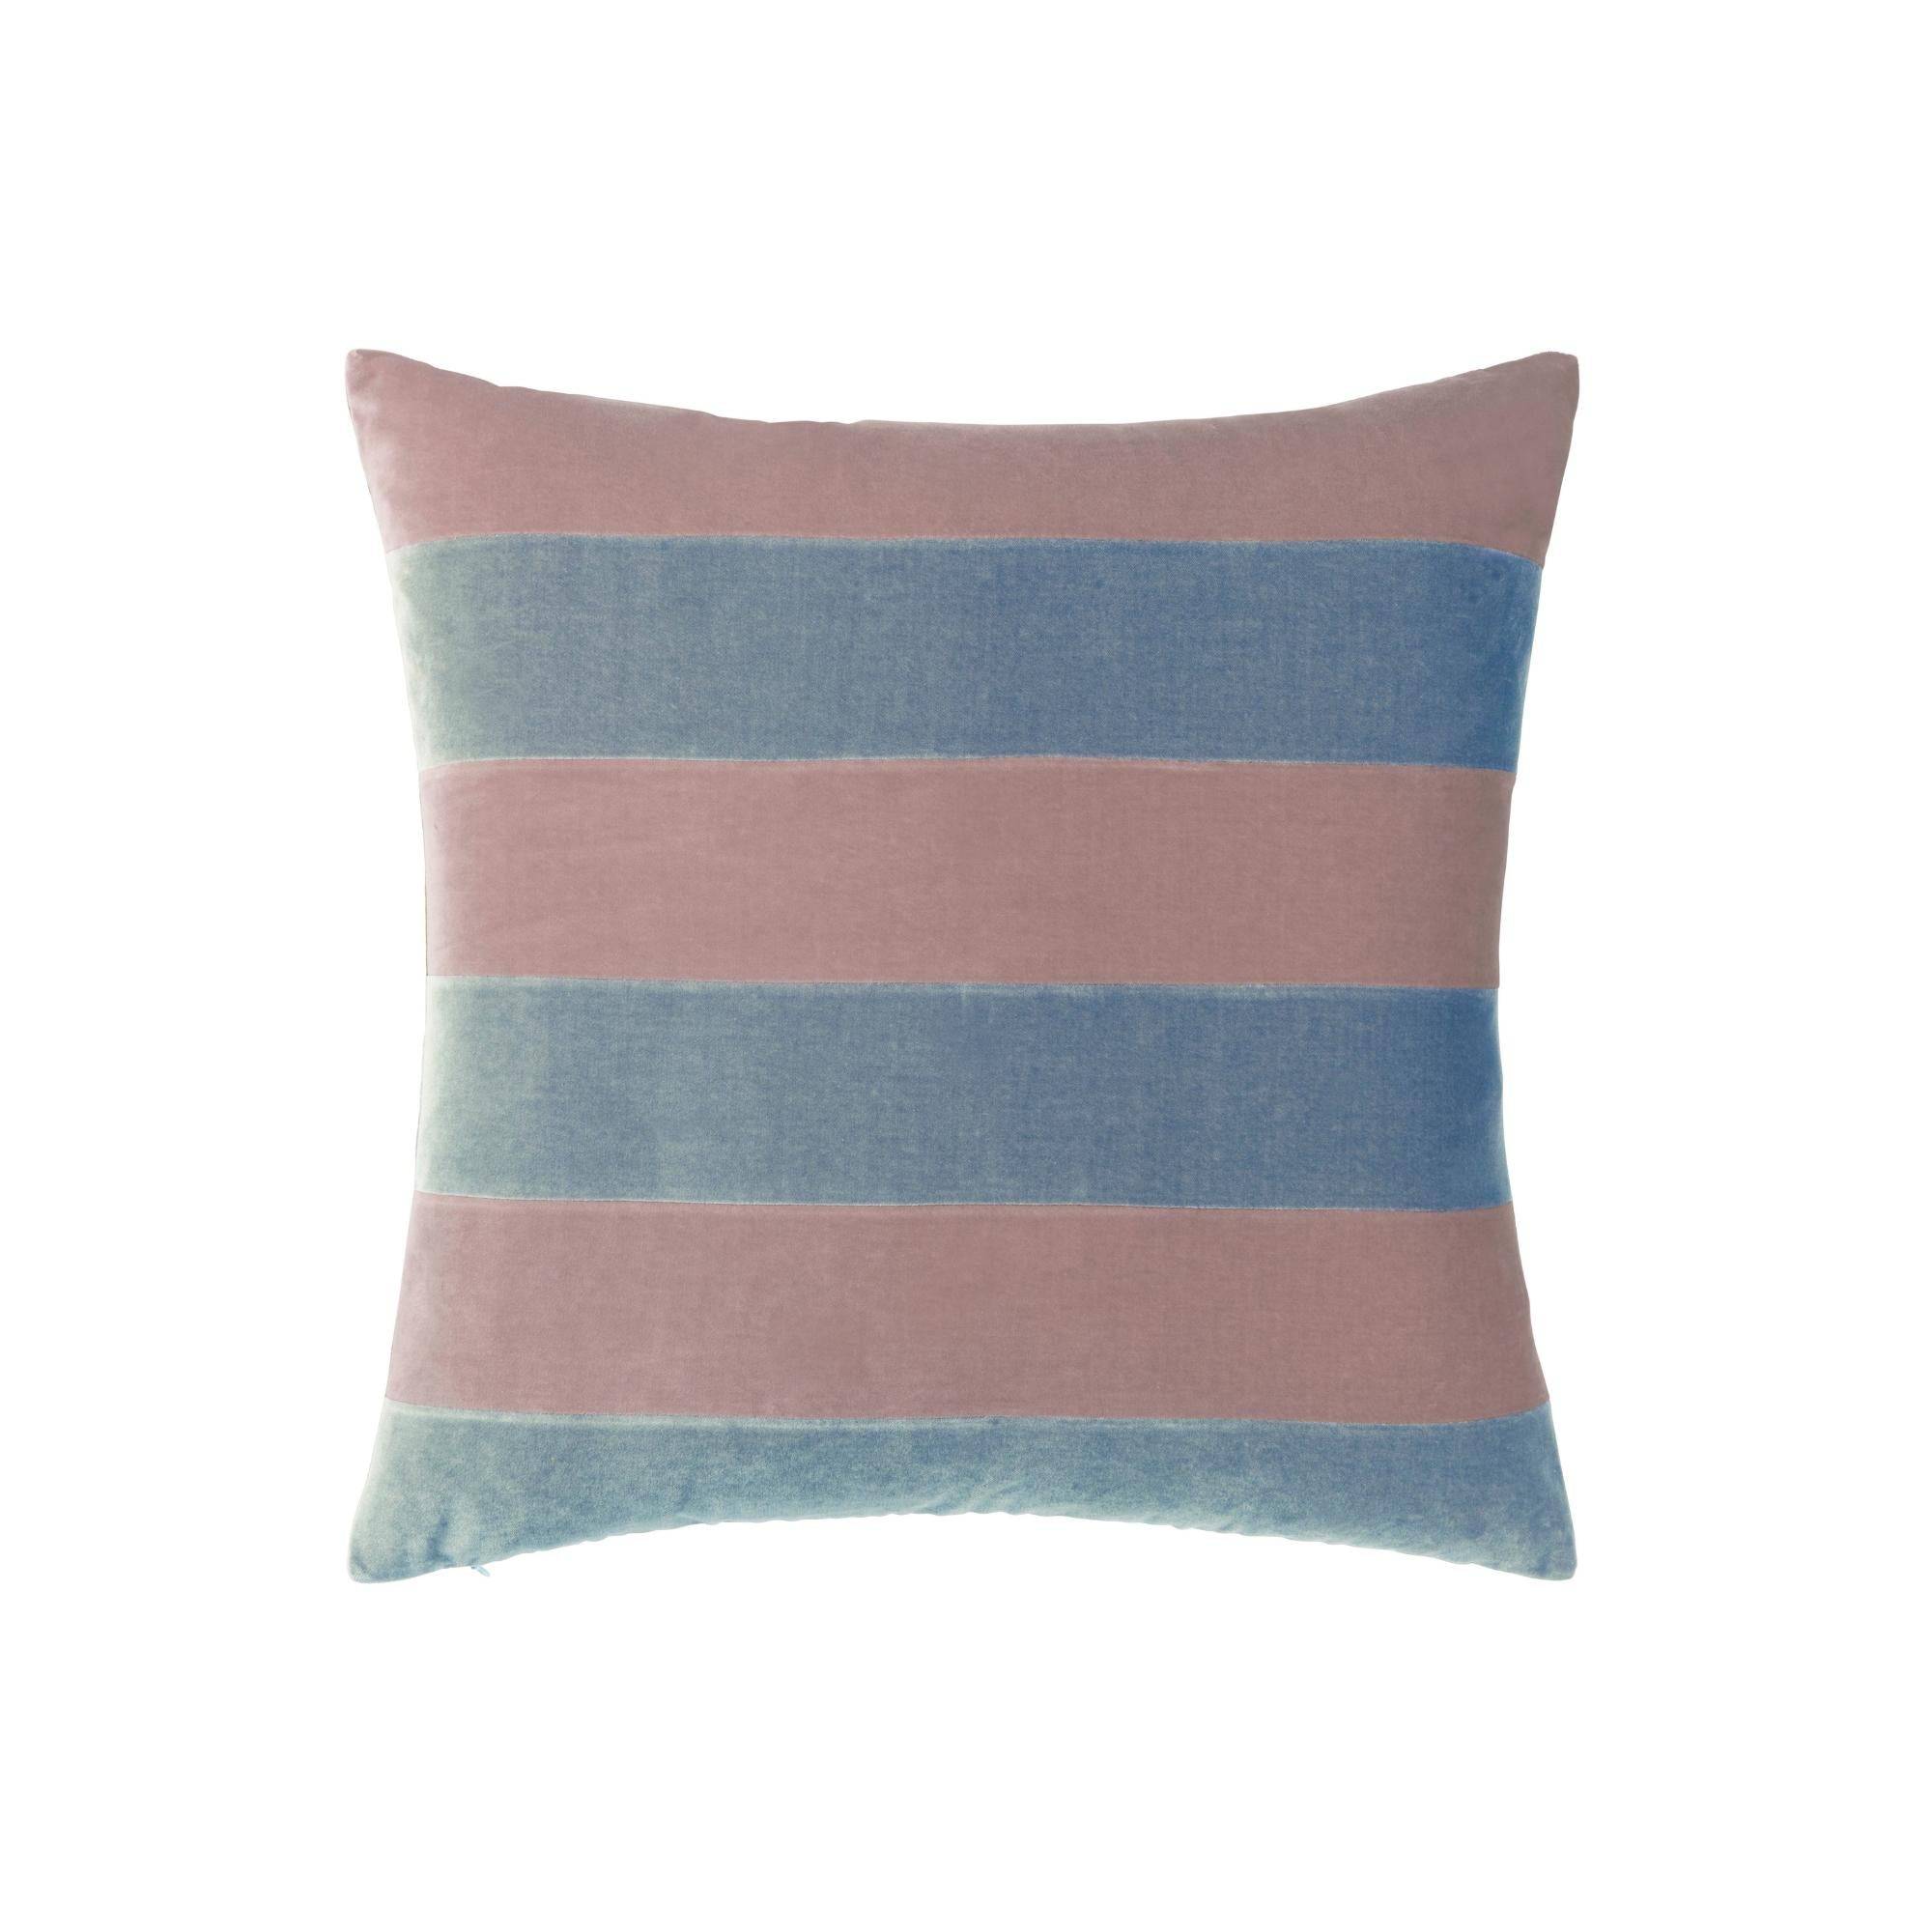 Stripe Cushion - Old Rose & Blue Dust - THAT COOL LIVING